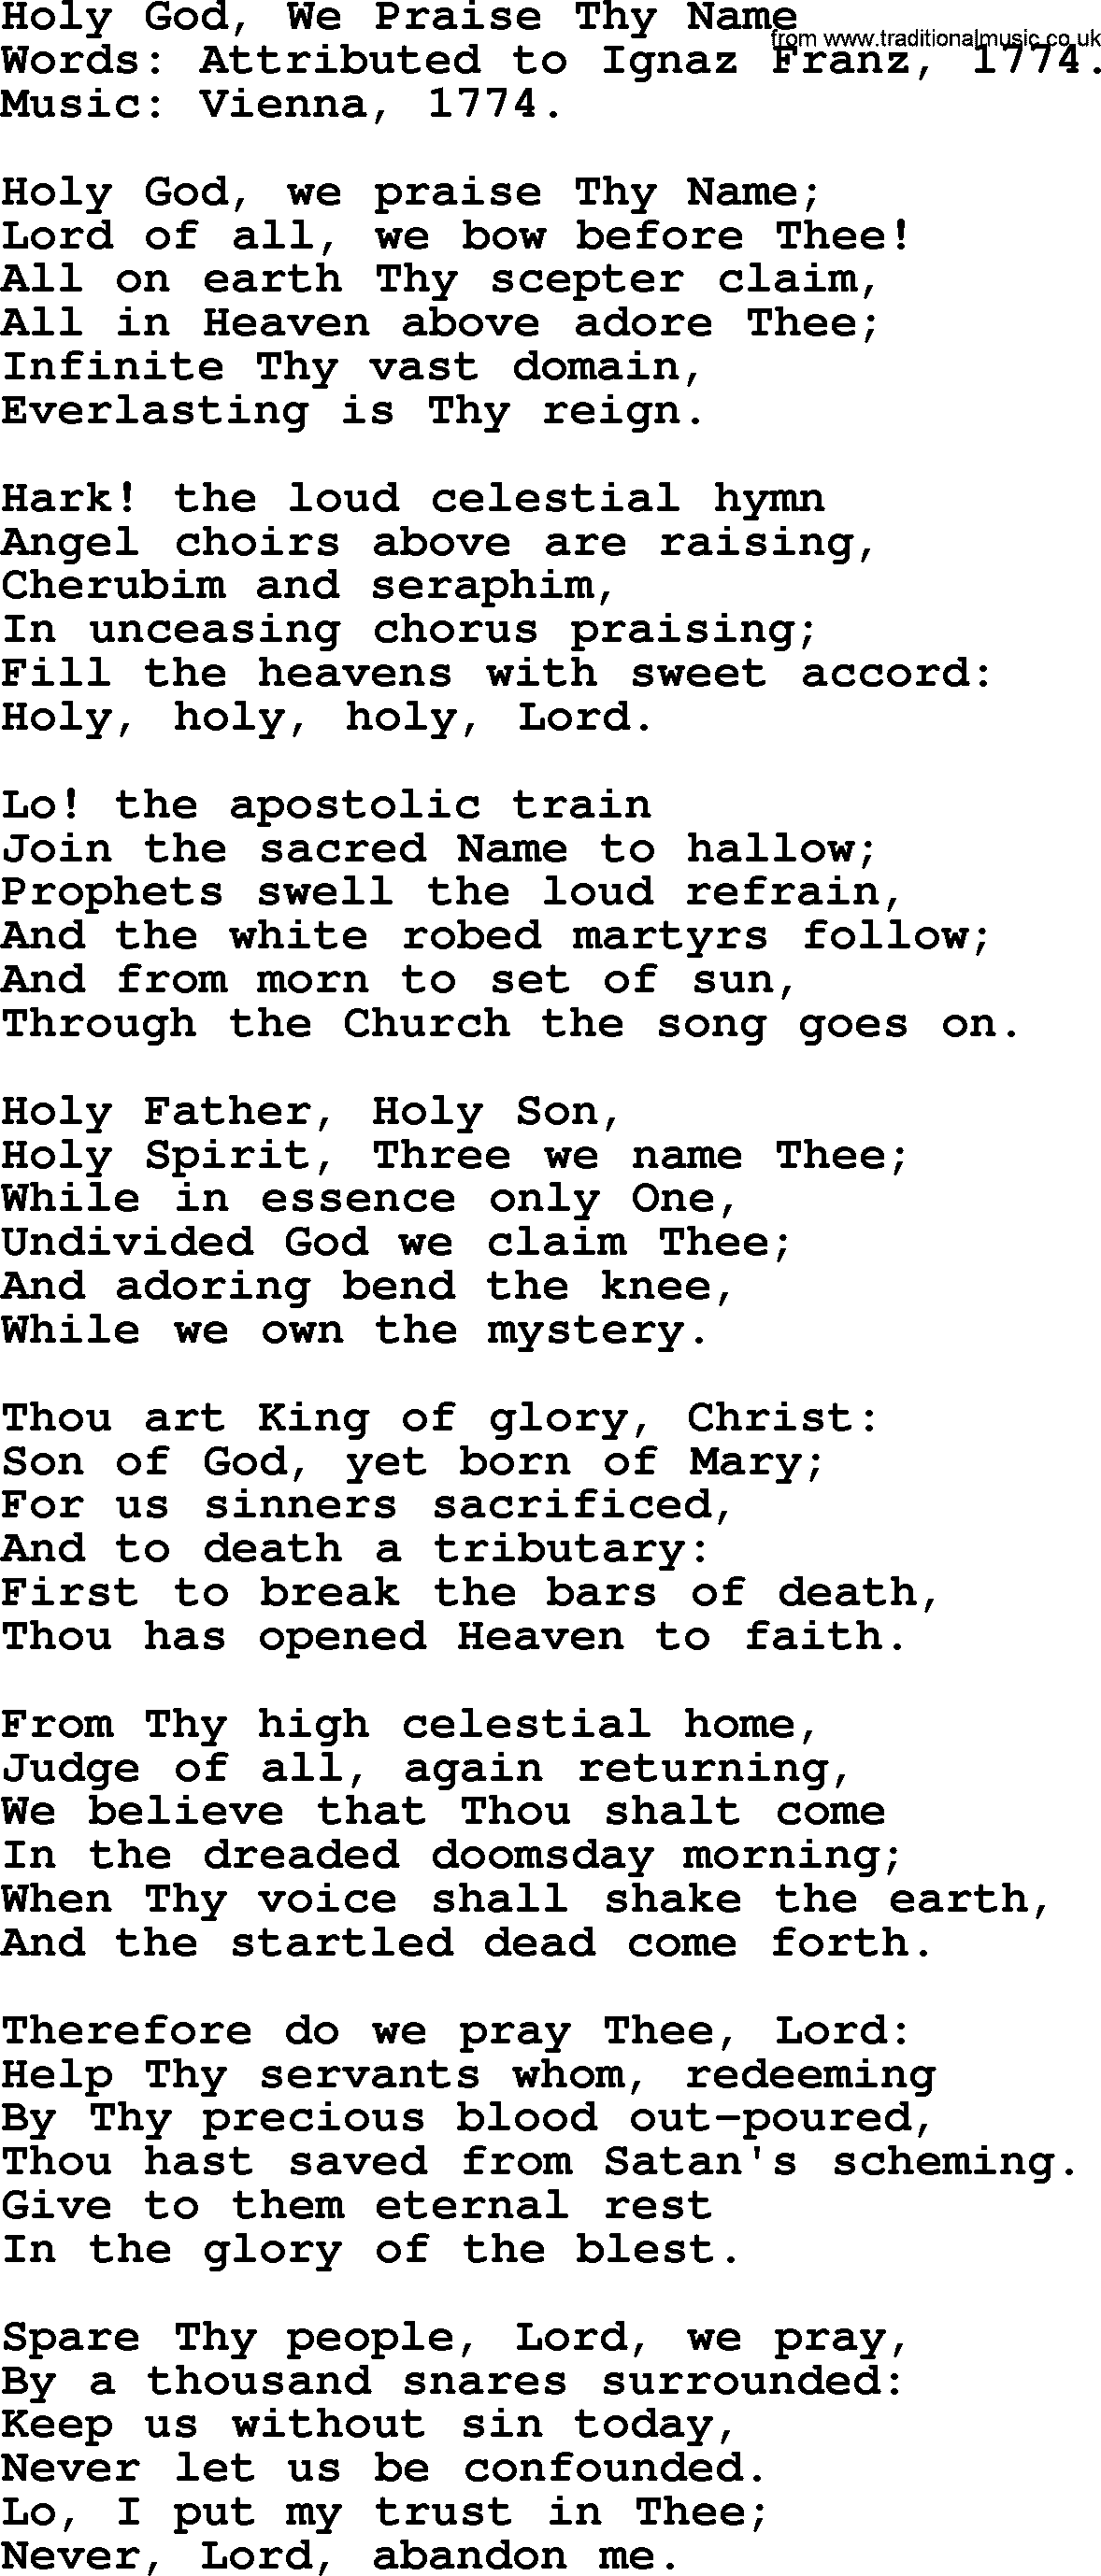 A collection of 500+ most sung Christian church hymns and songs, title: Holy God, We Praise Thy Name, lyrics, PPTX and PDF